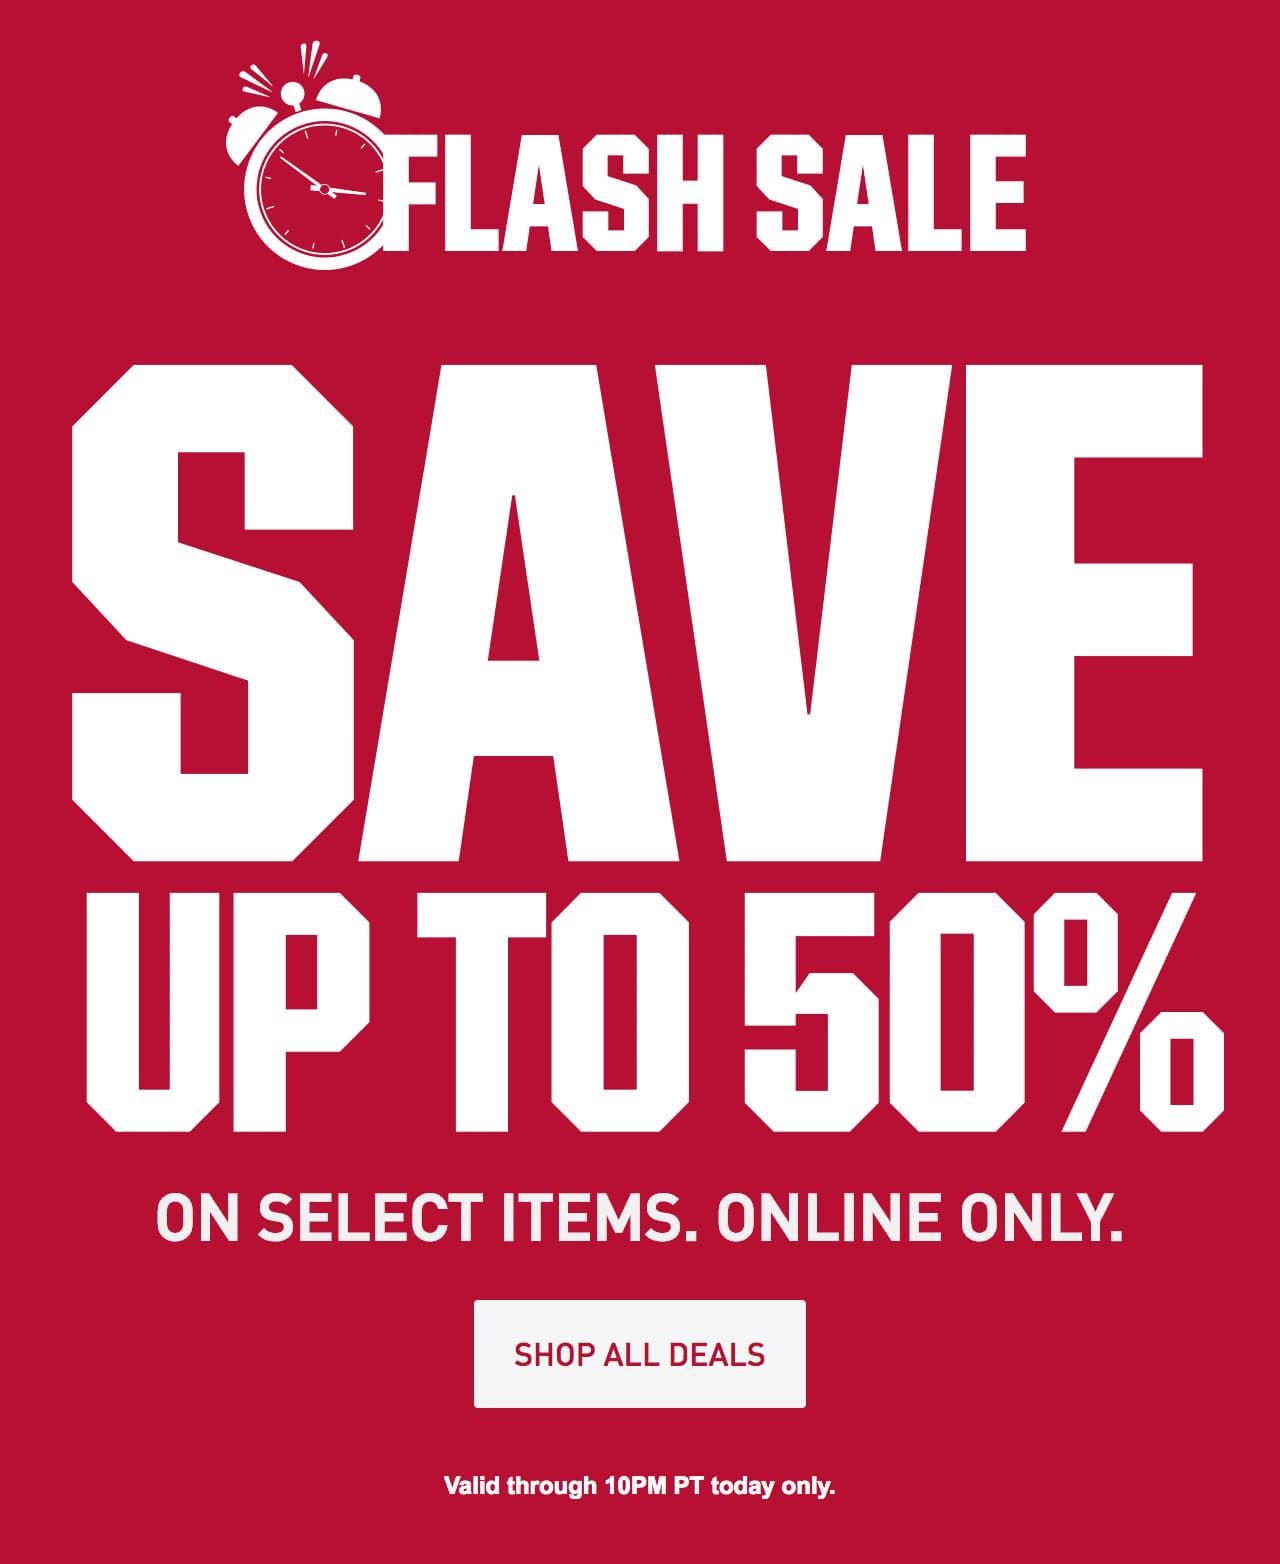 ENDS TONIGHT - FLASH SALE SAVE UP TO 50% on select items. online only. | Valid 10PM PT today only | SHOP NOW until 10pm ET – After 10pm, click here to shop more of this Week’s Deals. If you have trouble viewing this content, please contact Customer Service at 877-846-9997 for assistance.